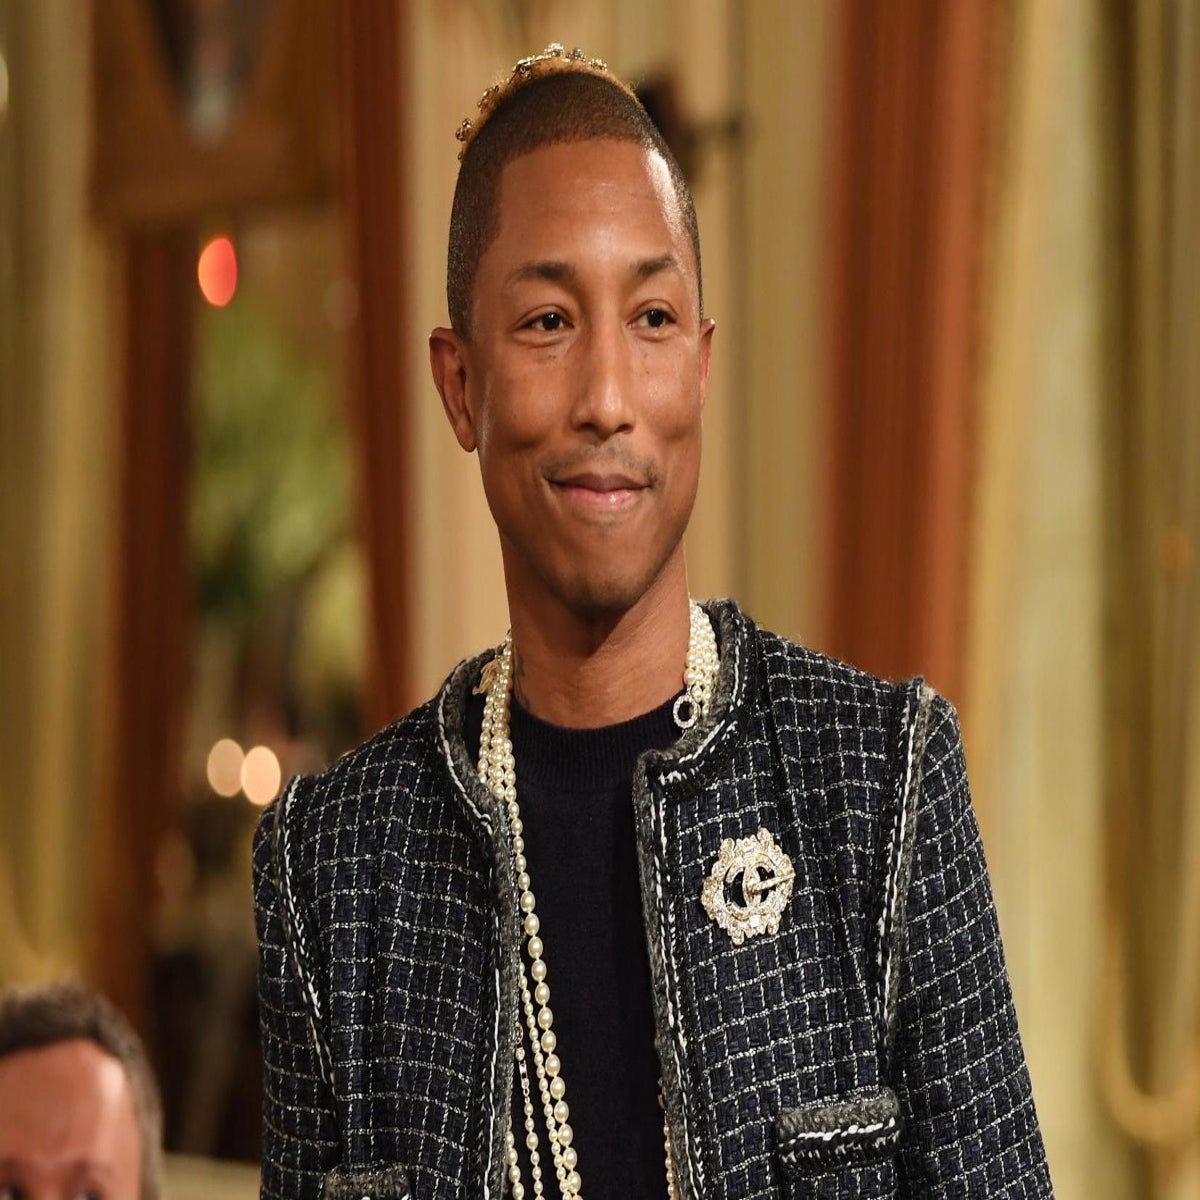 Pharrell Williams teases new Chanel collaboration in short film